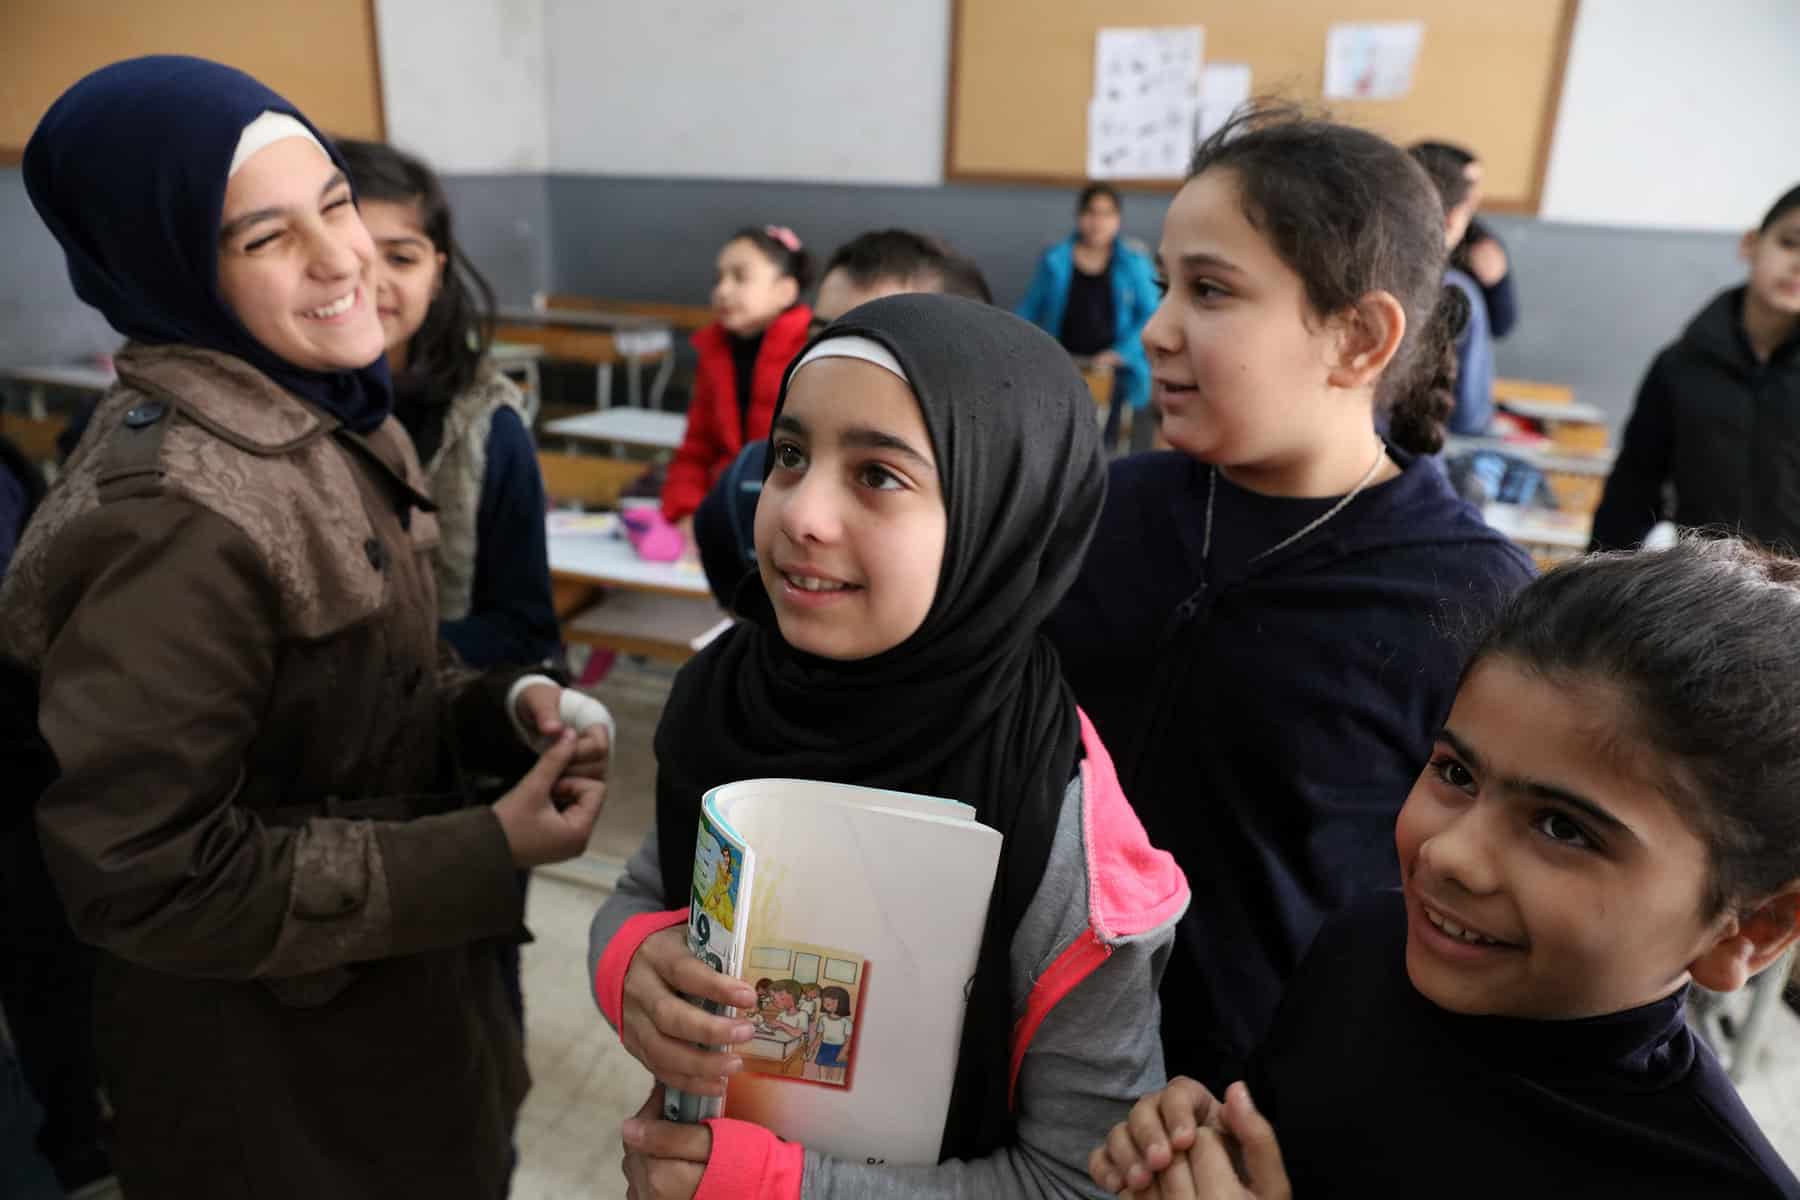 Students at school in Beirut, Lebanon. Two-thirds of the students at the school are Lebanese and one-third of the students are Syrian. Photo © Dominic Chavez/World Bank